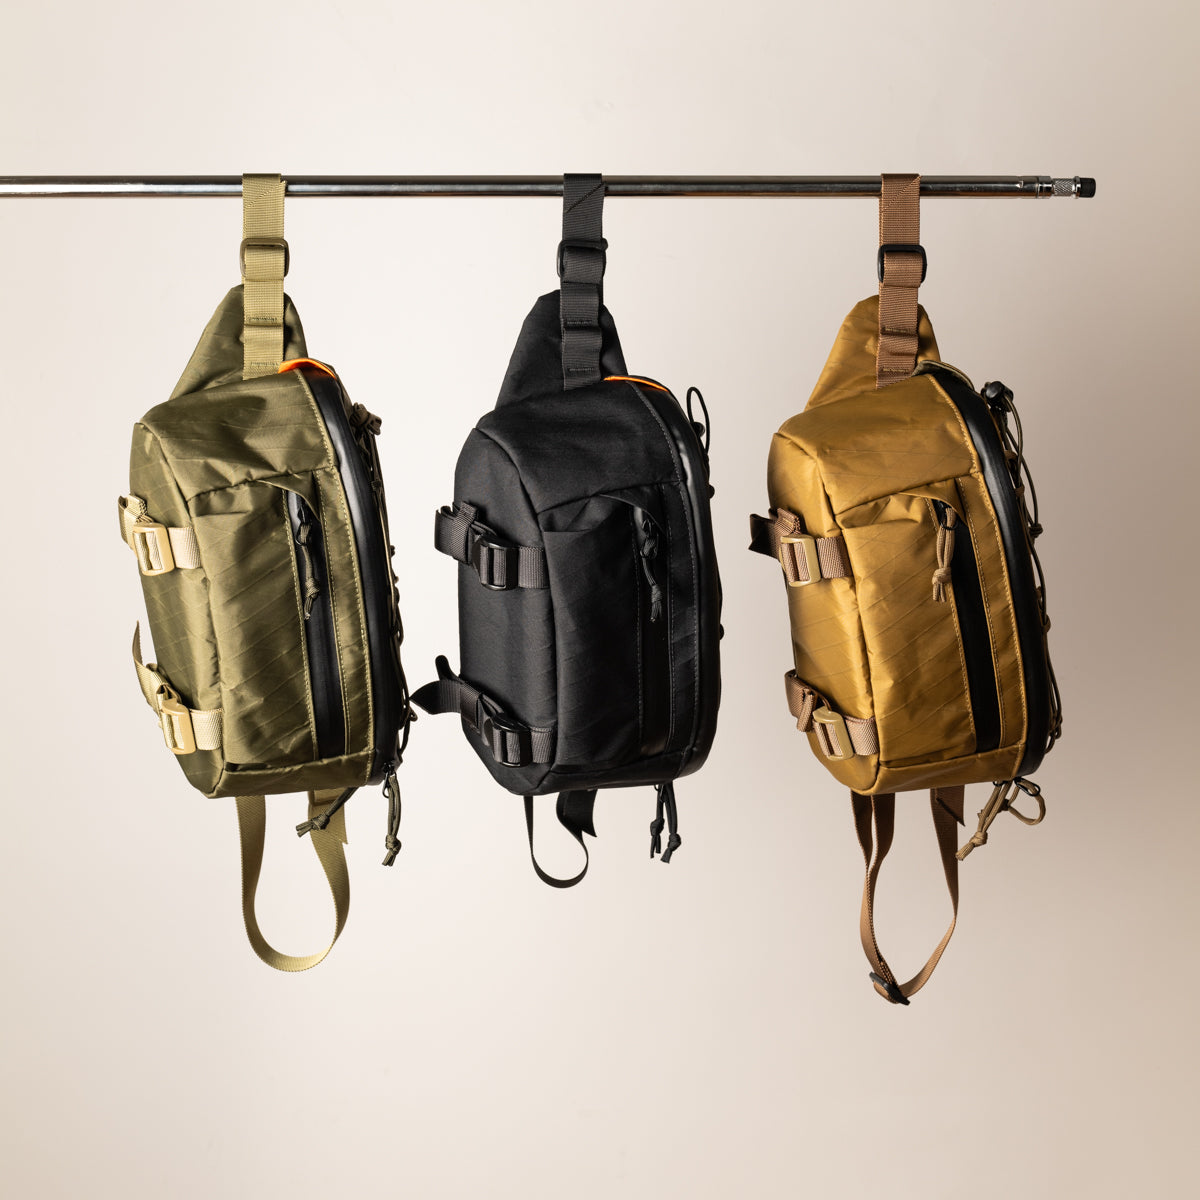 Route Unknown : Sling Pack V3 : Xpac Dark Olive